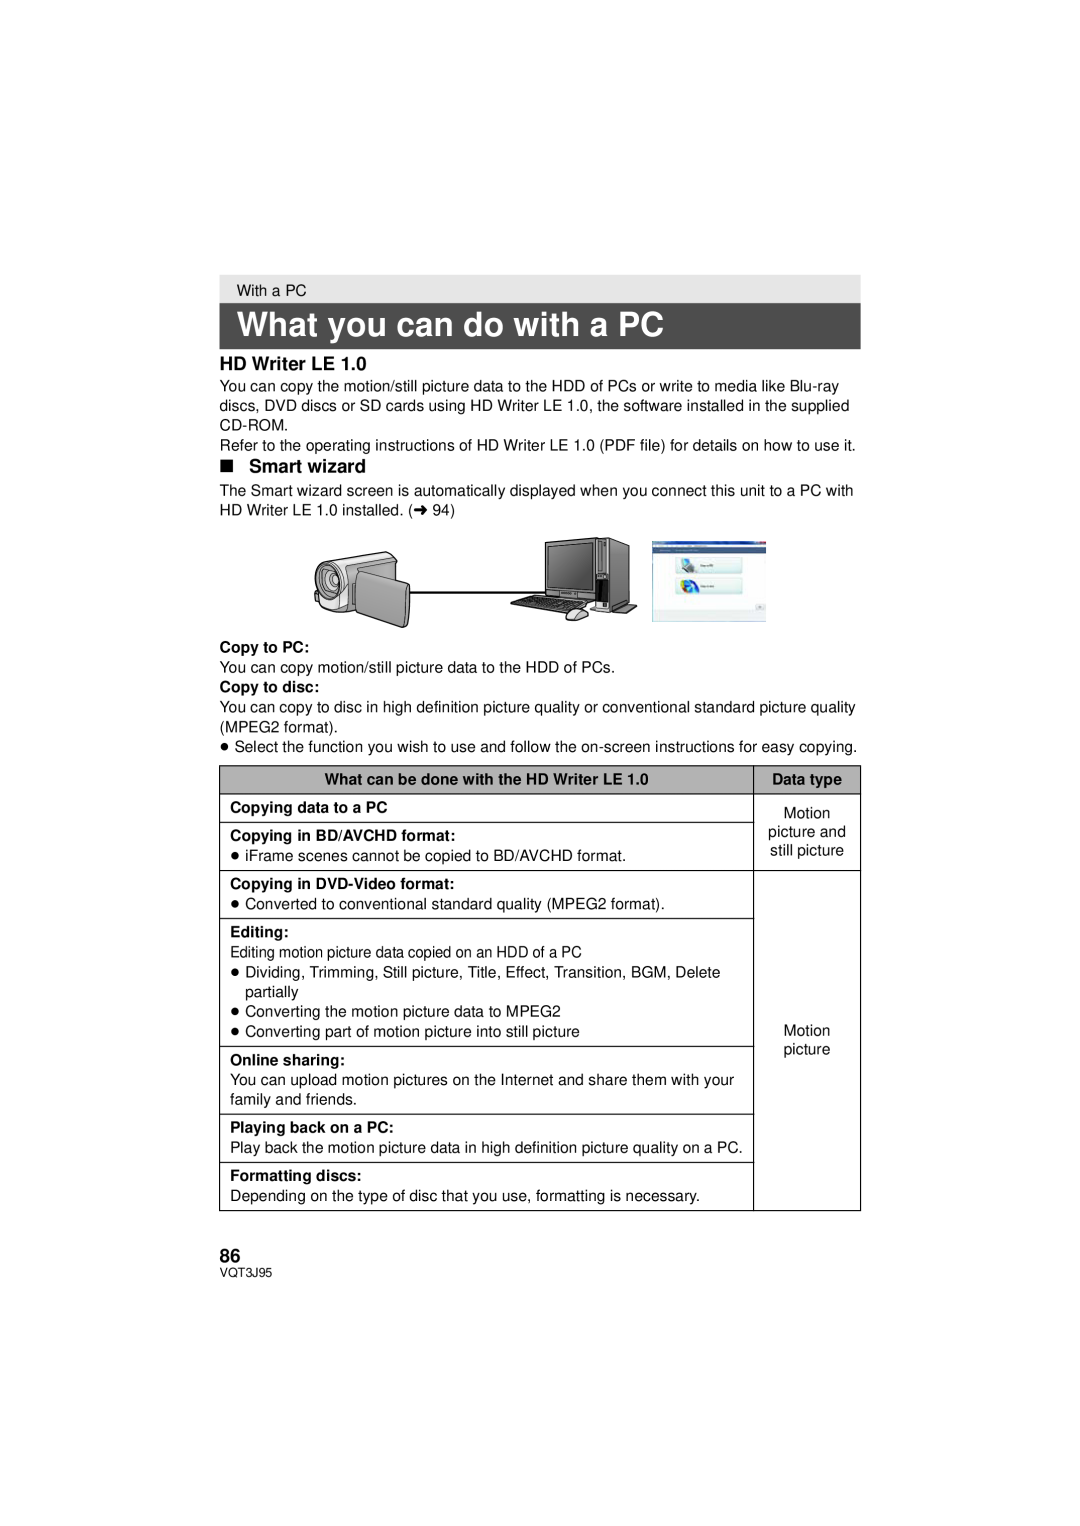 Panasonic HDC-TM40P/PC What you can do with a PC, HD Writer LE, ∫ Smart wizard, Copy to PC, Copy to disc, Data type 